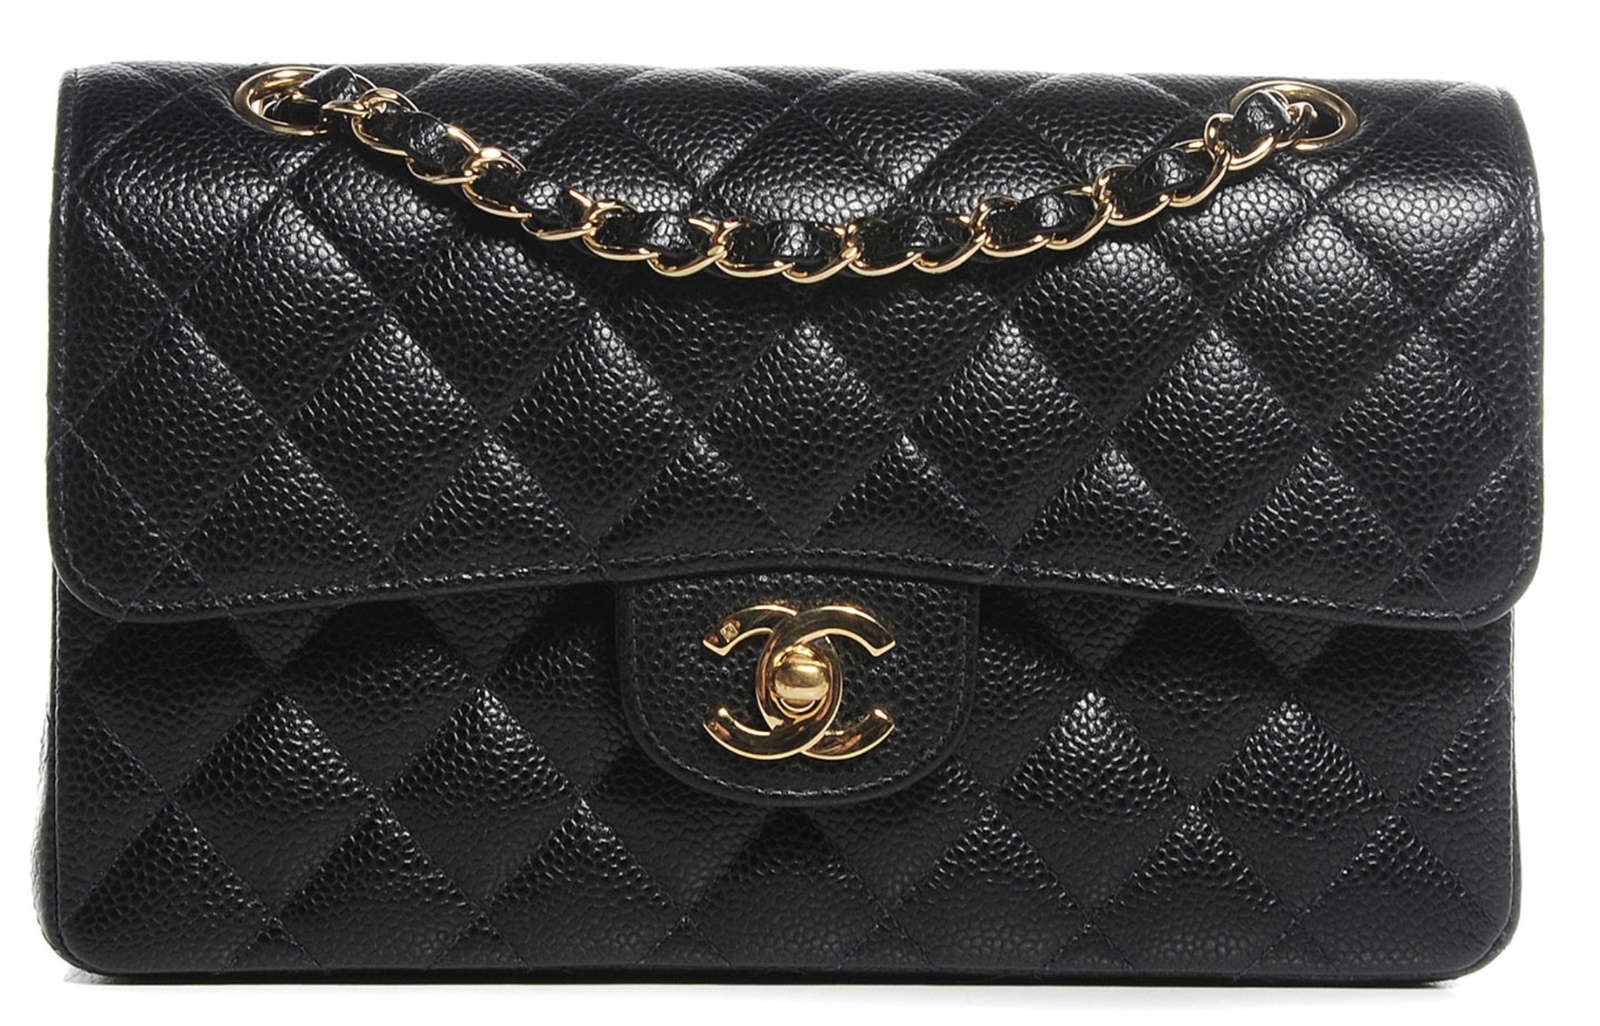 Original Chanel Bag Price In Pakistan | Confederated Tribes of the Umatilla Indian Reservation